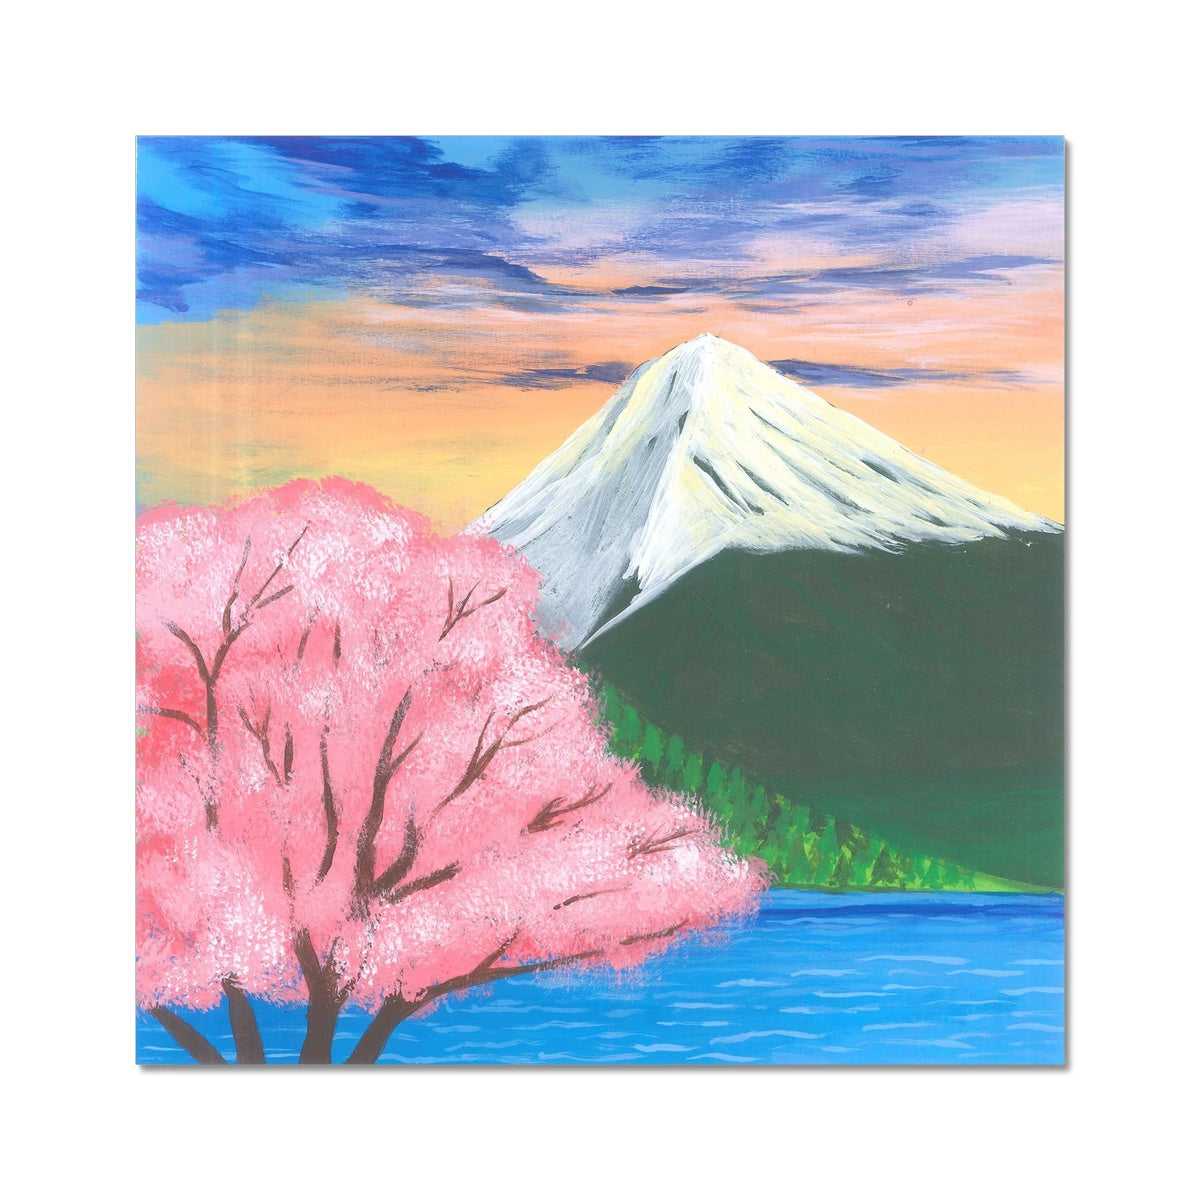 Spring in the Himalayan Foothills - Sunset Harmony by the Cherry Blossoms and Snowy Summit Fine Art Print - nature soundscape art - earth.fm